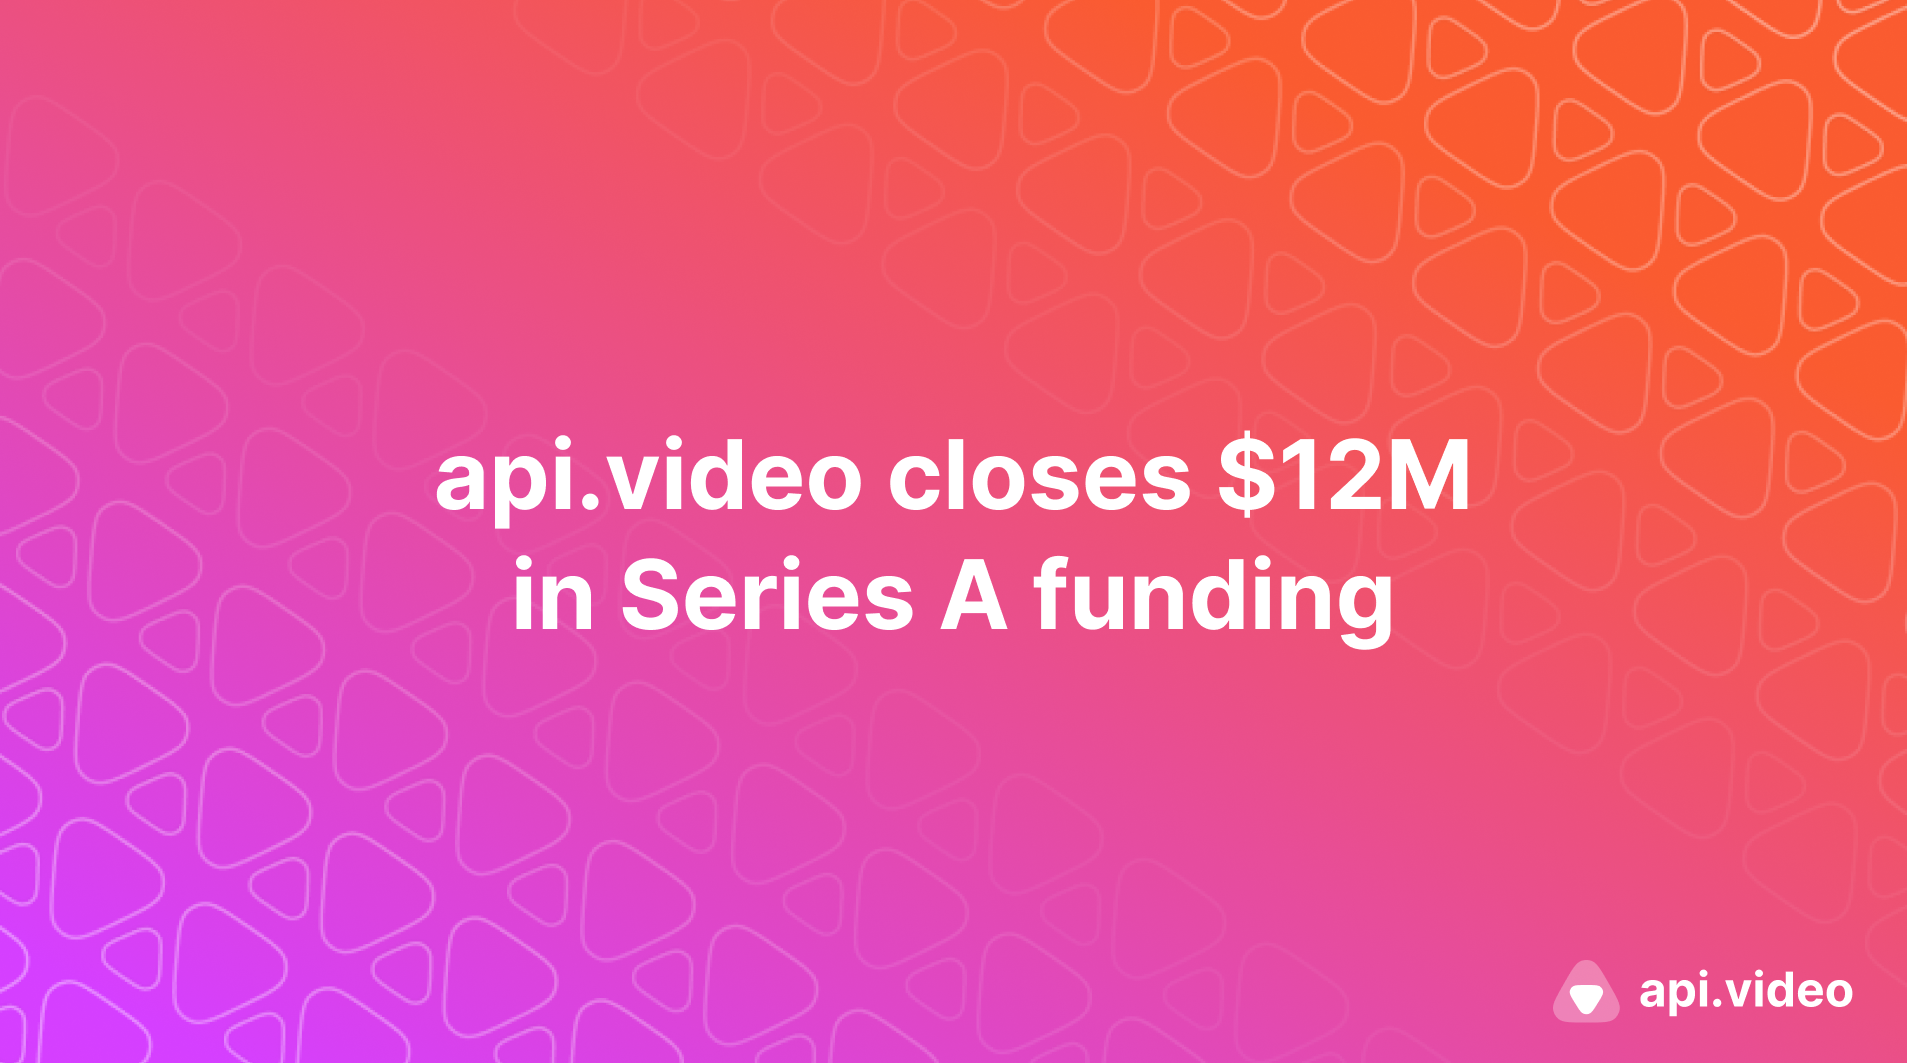 api.video closes $12M in Series A funding